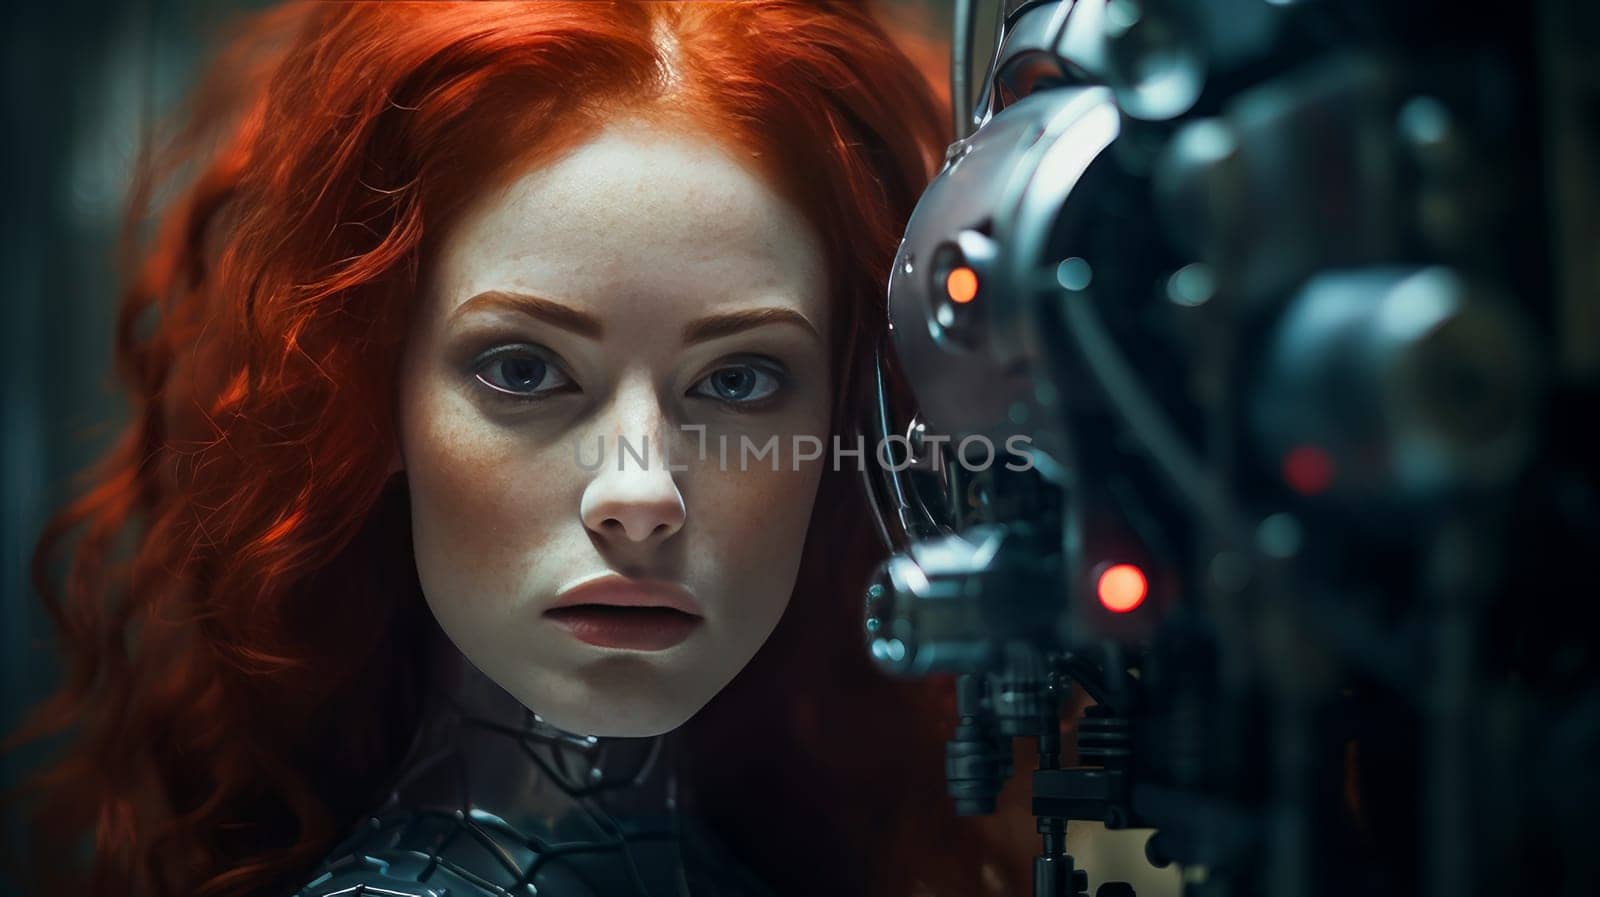 Robot cyborg woman girl with red hair with artificial intelligence, future technologies. Internet and digital technologies. Global network. Integrating technology and human interaction. Chat bot. Digital technologies of the future